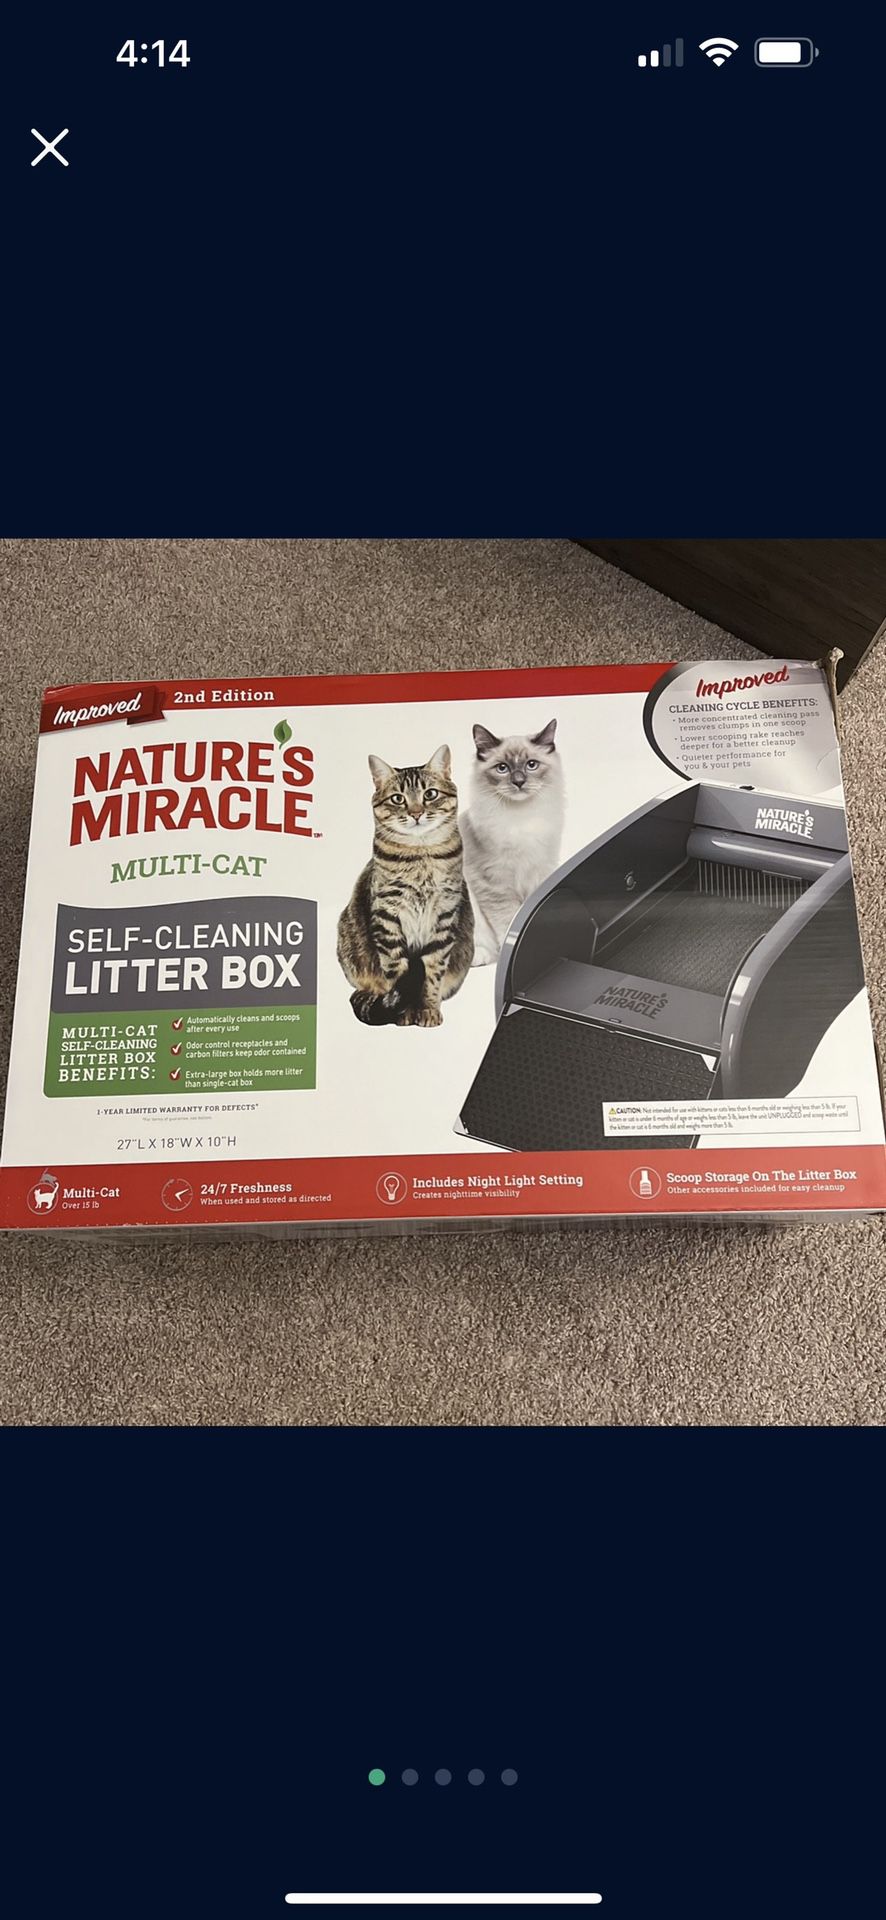 Nature’s Miracle Litter Box